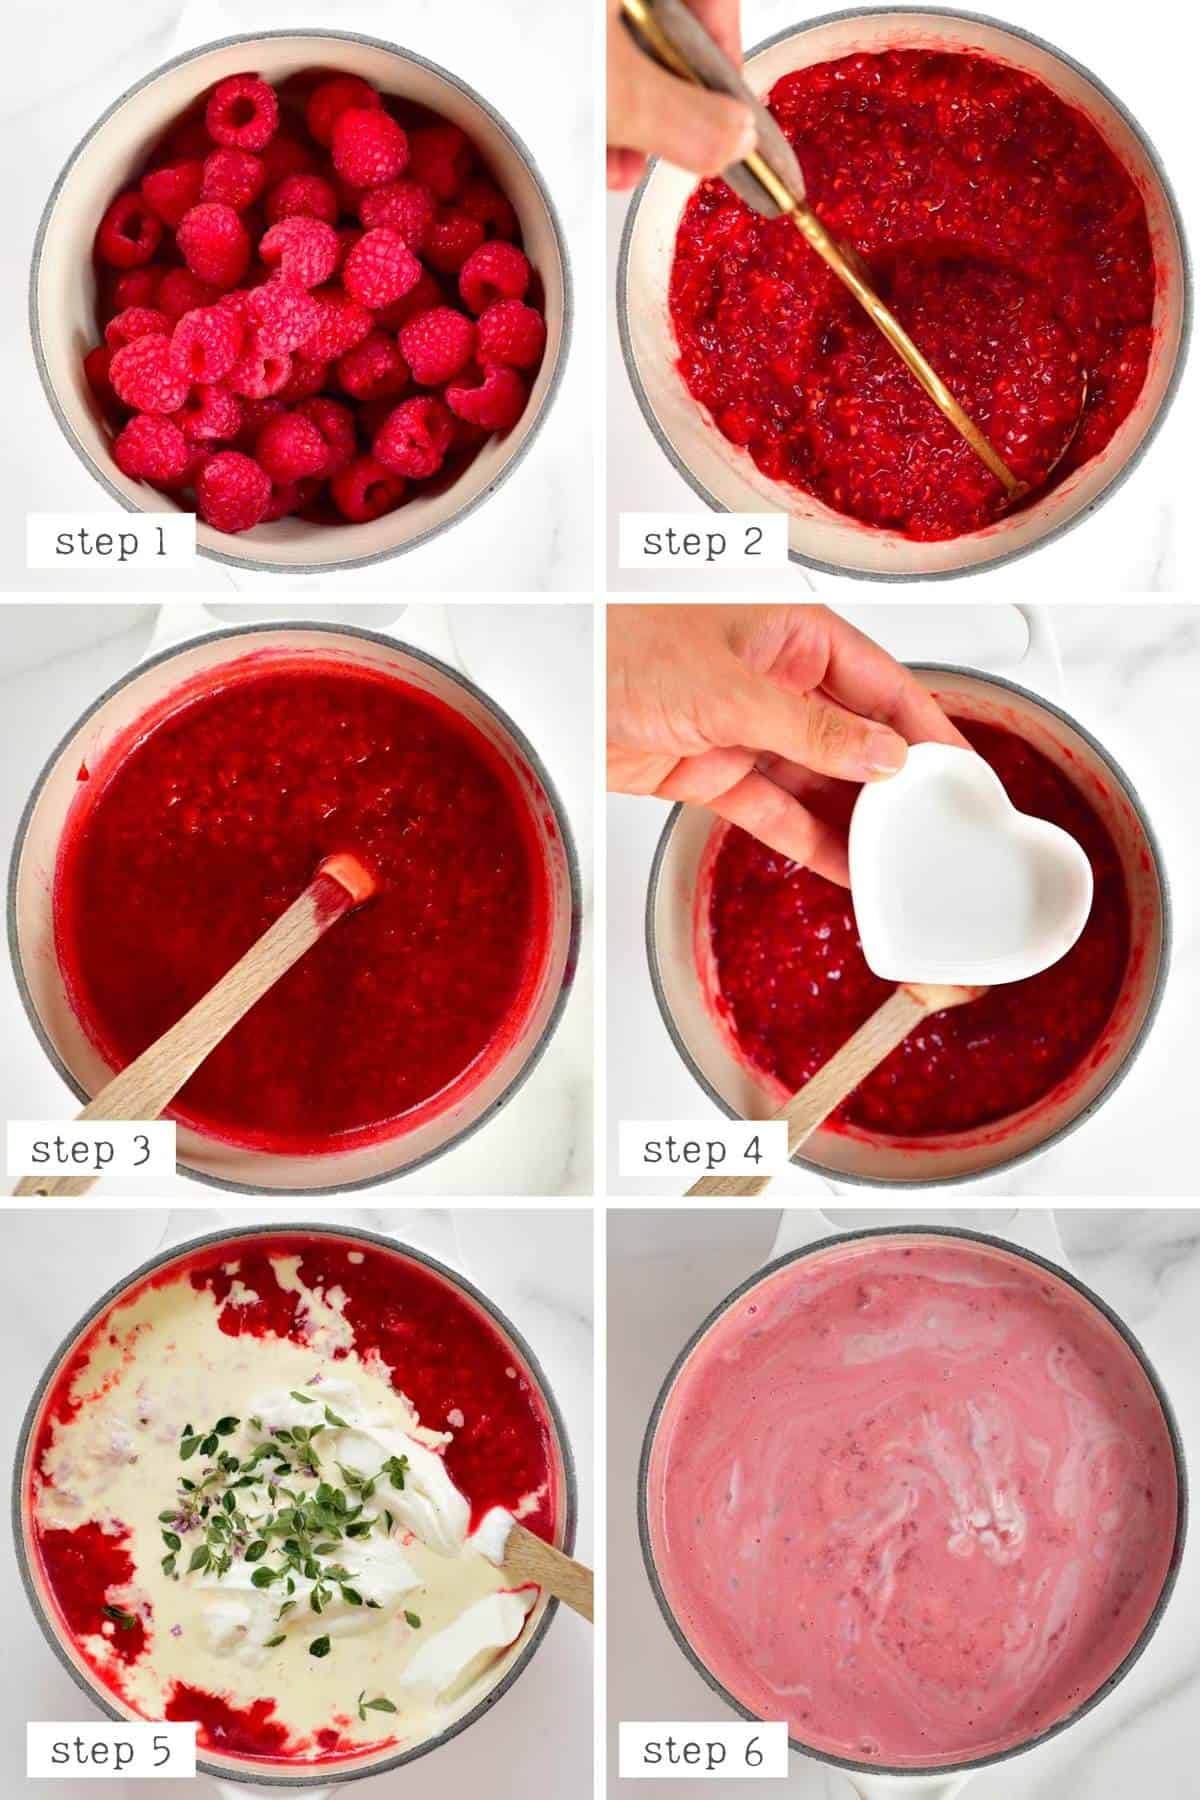 Steps for making the raspberry ice cream